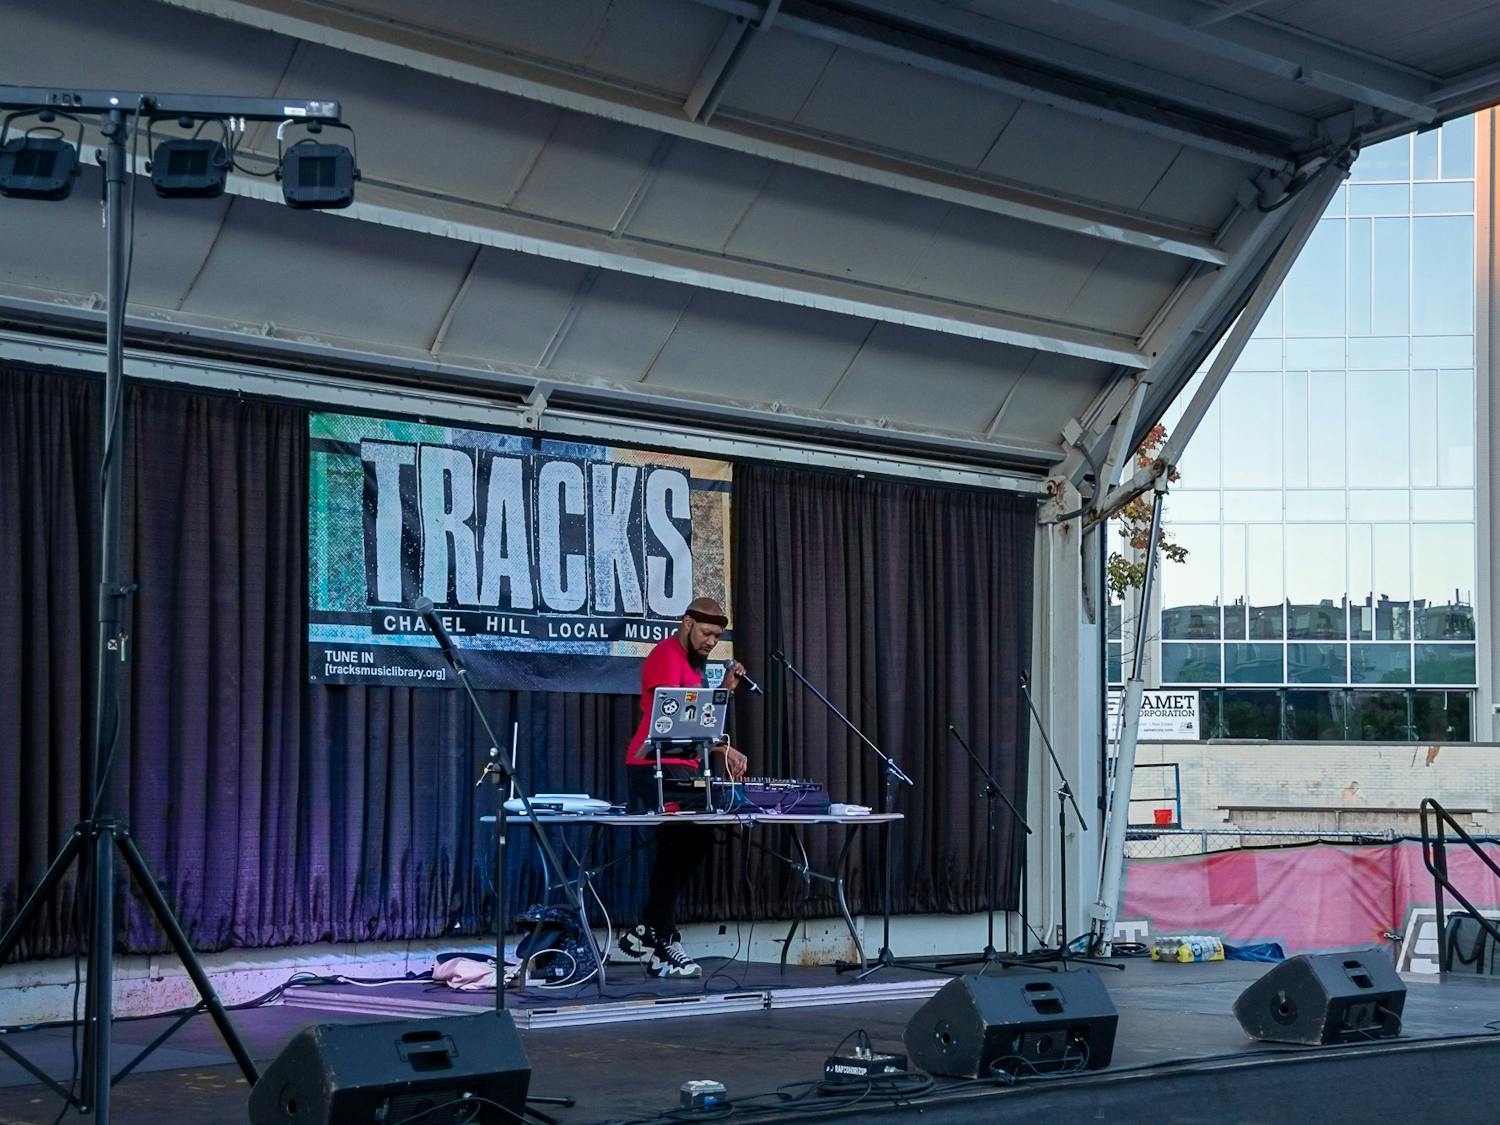 VSPTRN, a DJ and producer from Durham, performing at the Tracks Music Series concert in Chapel Hill, N.C., on Thursday, Sept. 8, 2022. VSPTRN is known for infusing hip-hop, techno deep house, and afrobeats into their DJ style.